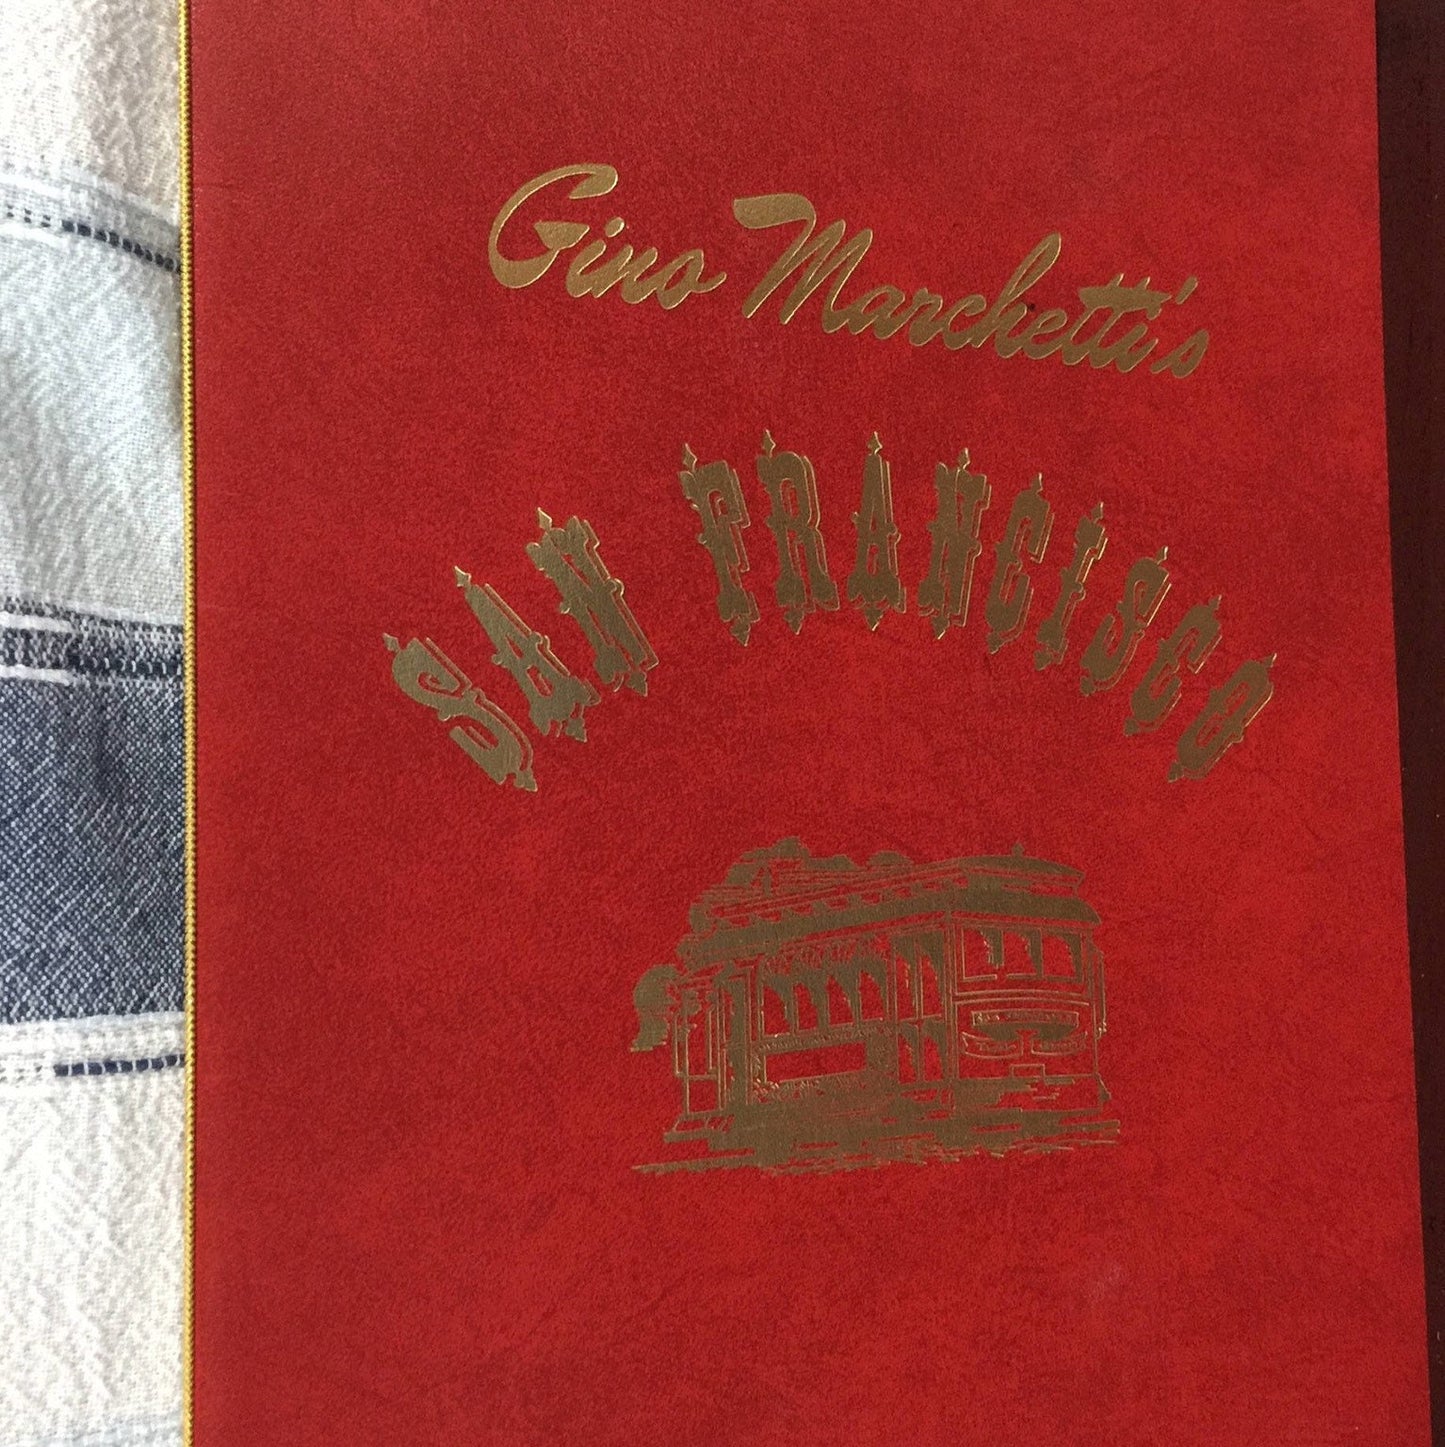 The San Francisco restaurant Wayne PA owned by Gino Marchetti founder of Gin'o's Hamburger fast food chain, Vintage Collectible menu